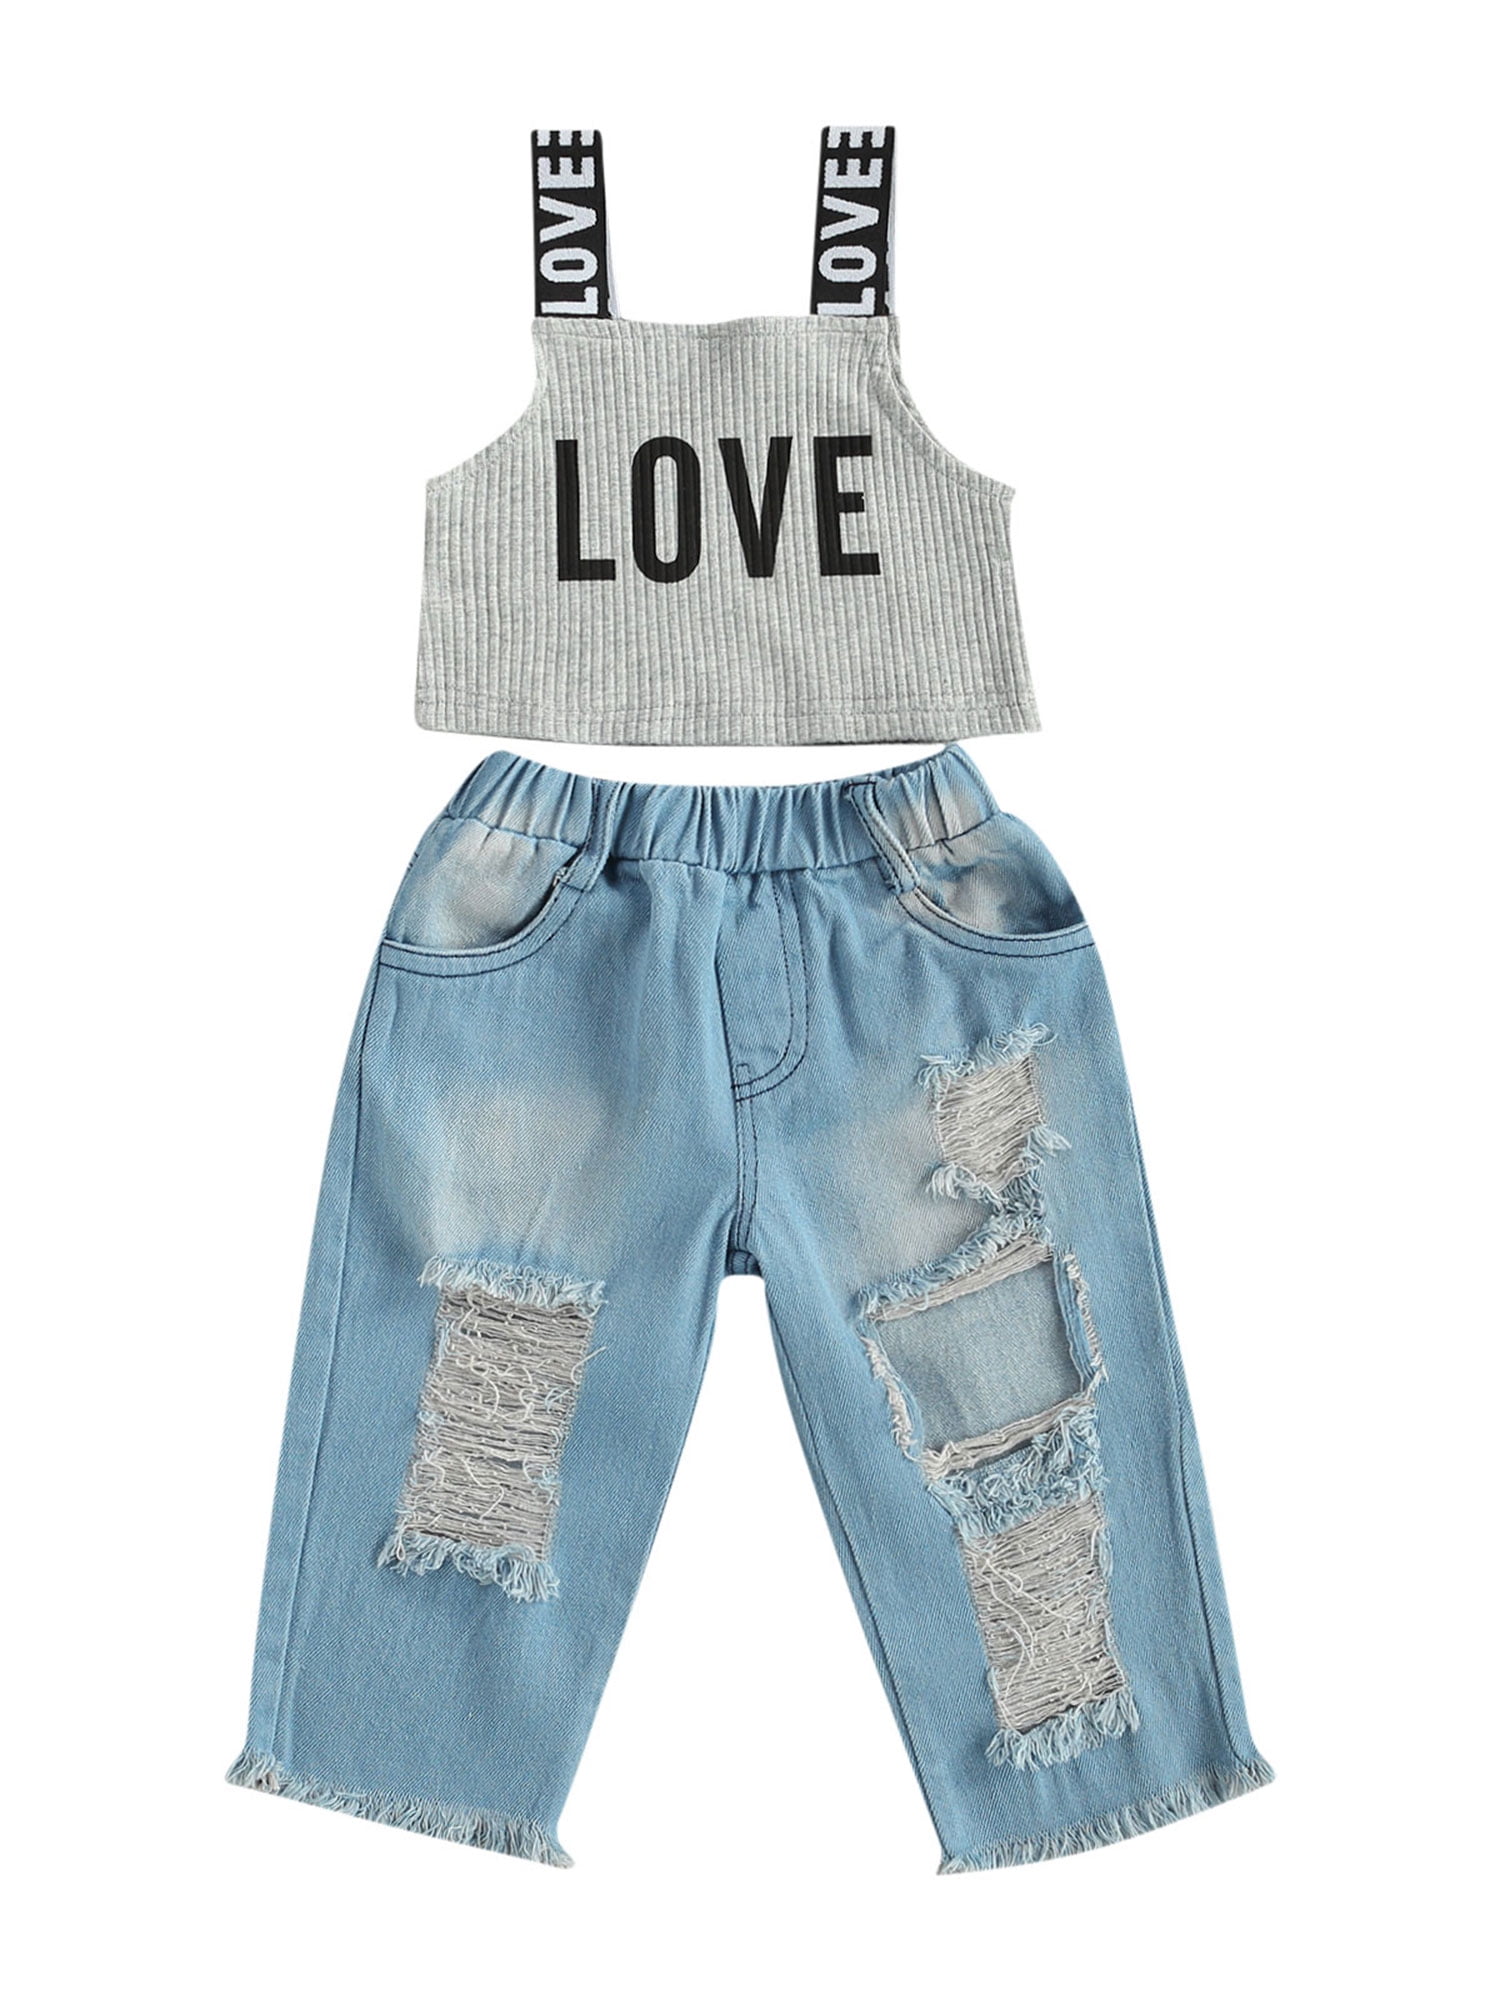 US Cute Toddler Baby Girl Vest Tops+Denim Ripped Pants Jeans Clothes Outfits Set 